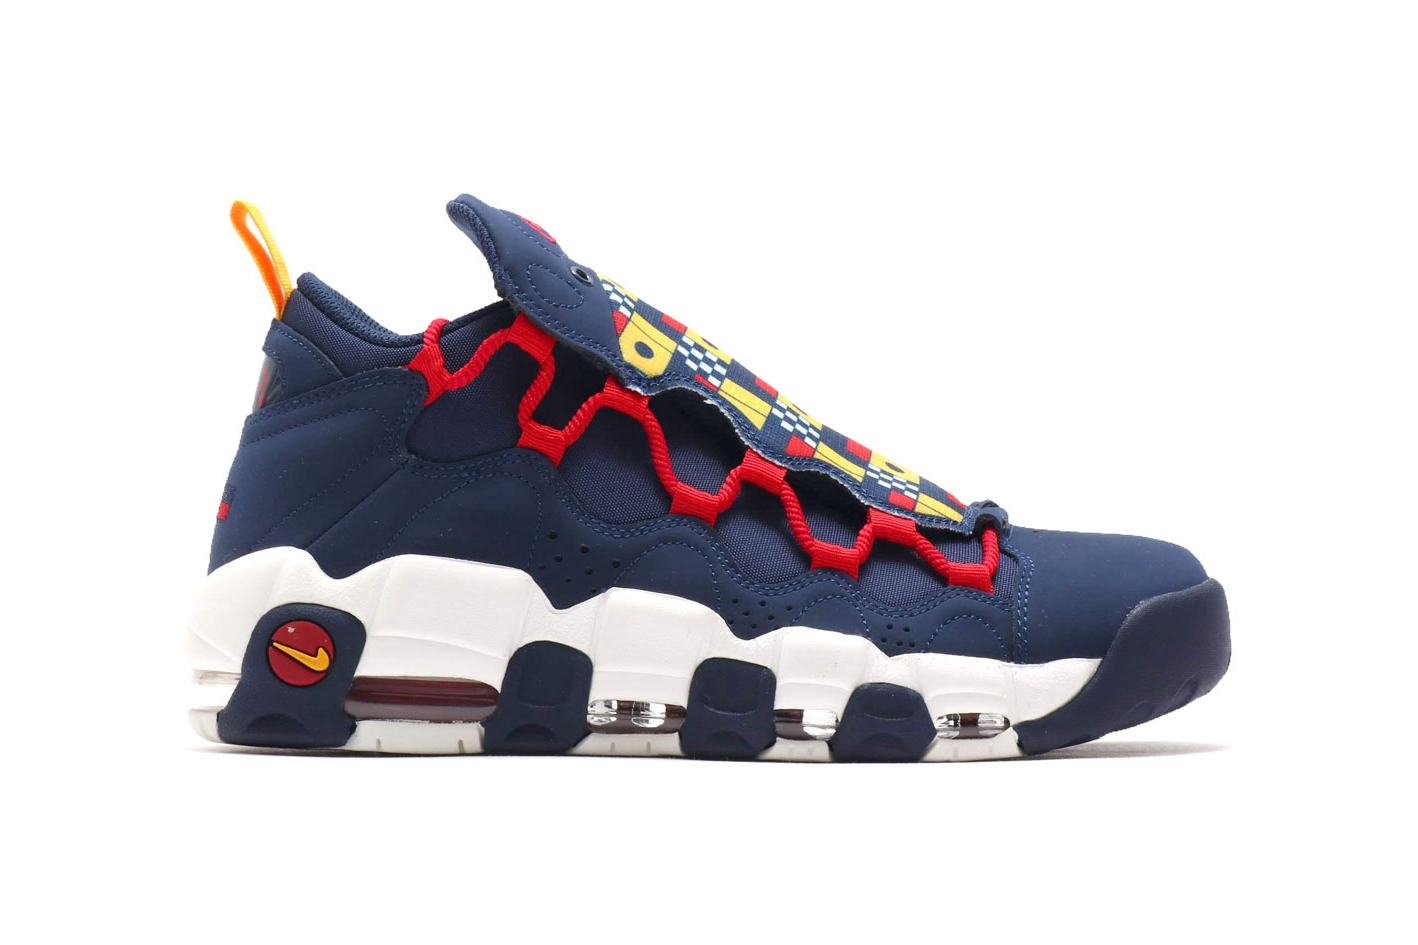 Nike Air More Money Nautical Redux pack drop release july 14 2018 release midnight navy flag sail gym red release